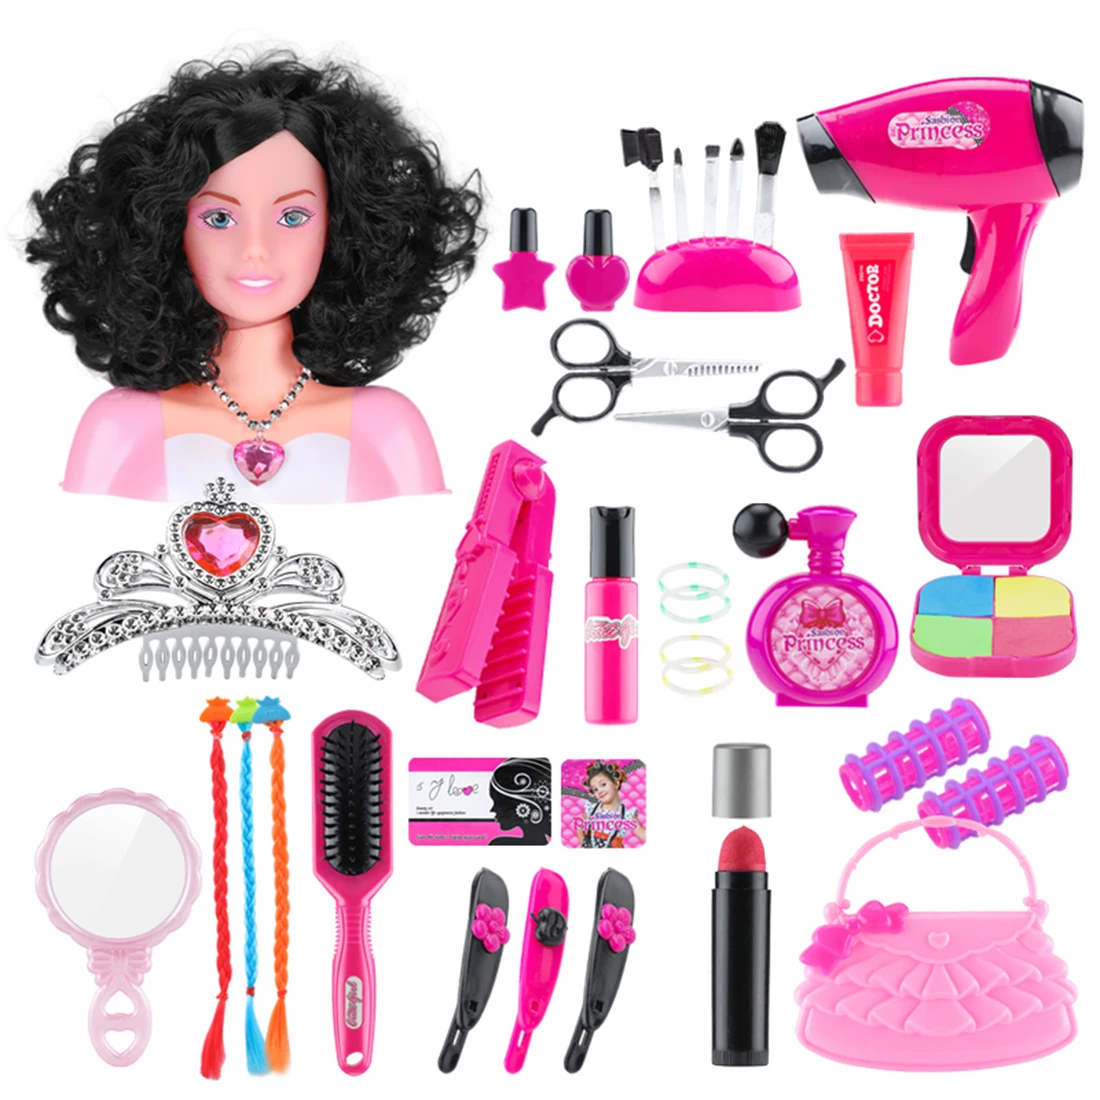 

37Pcs/set Children Makeup Styling Head Doll Hairstyle Toy with Hair Dryer Pretend Playset Gift For Girls' Birthday - 3811A-3